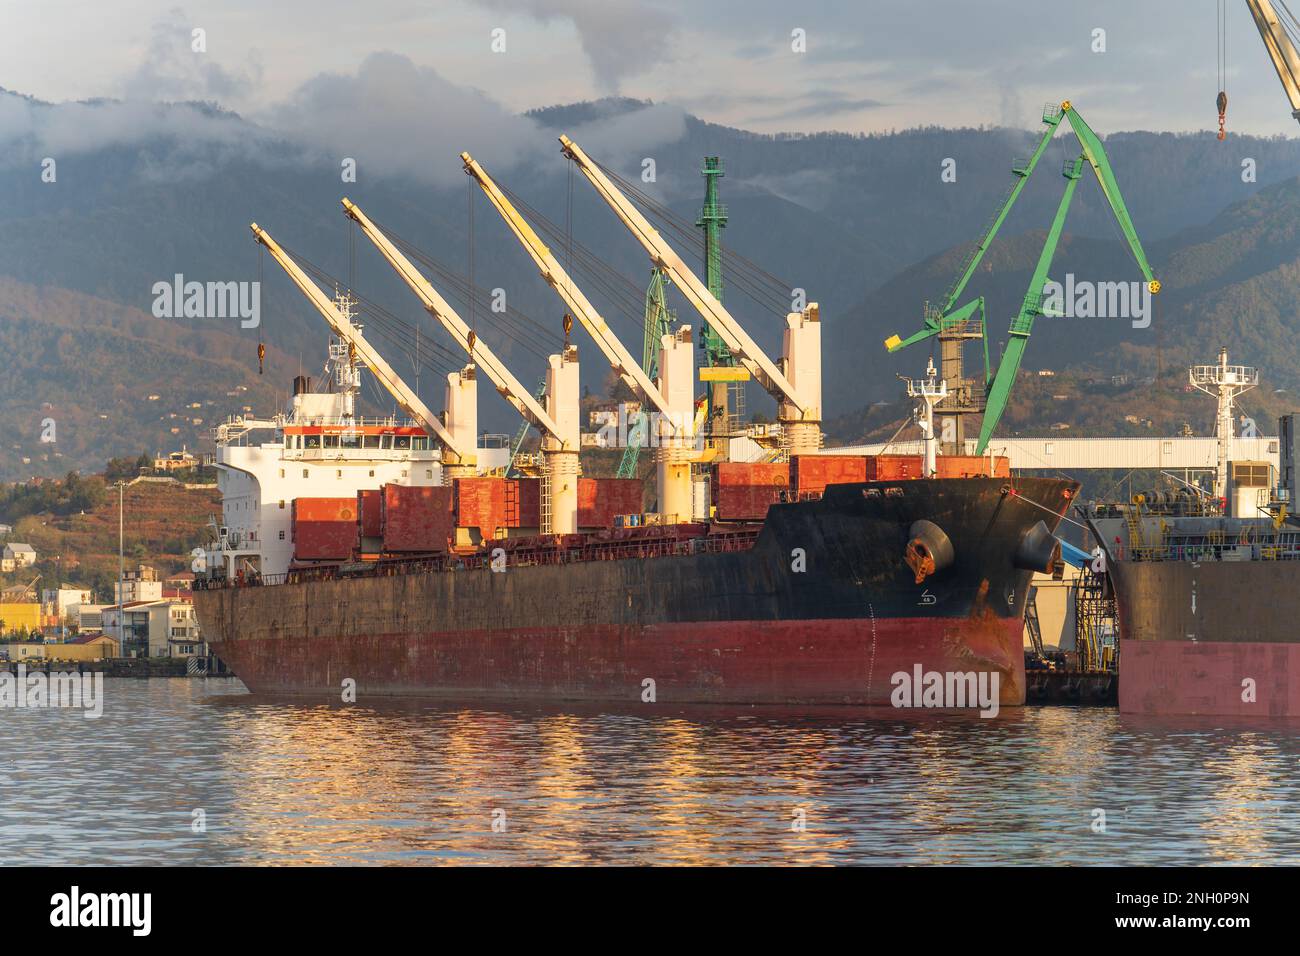 Cargo freight ship in industrial port. Logistics, import and export commerce, international transportation concept. Stock Photo